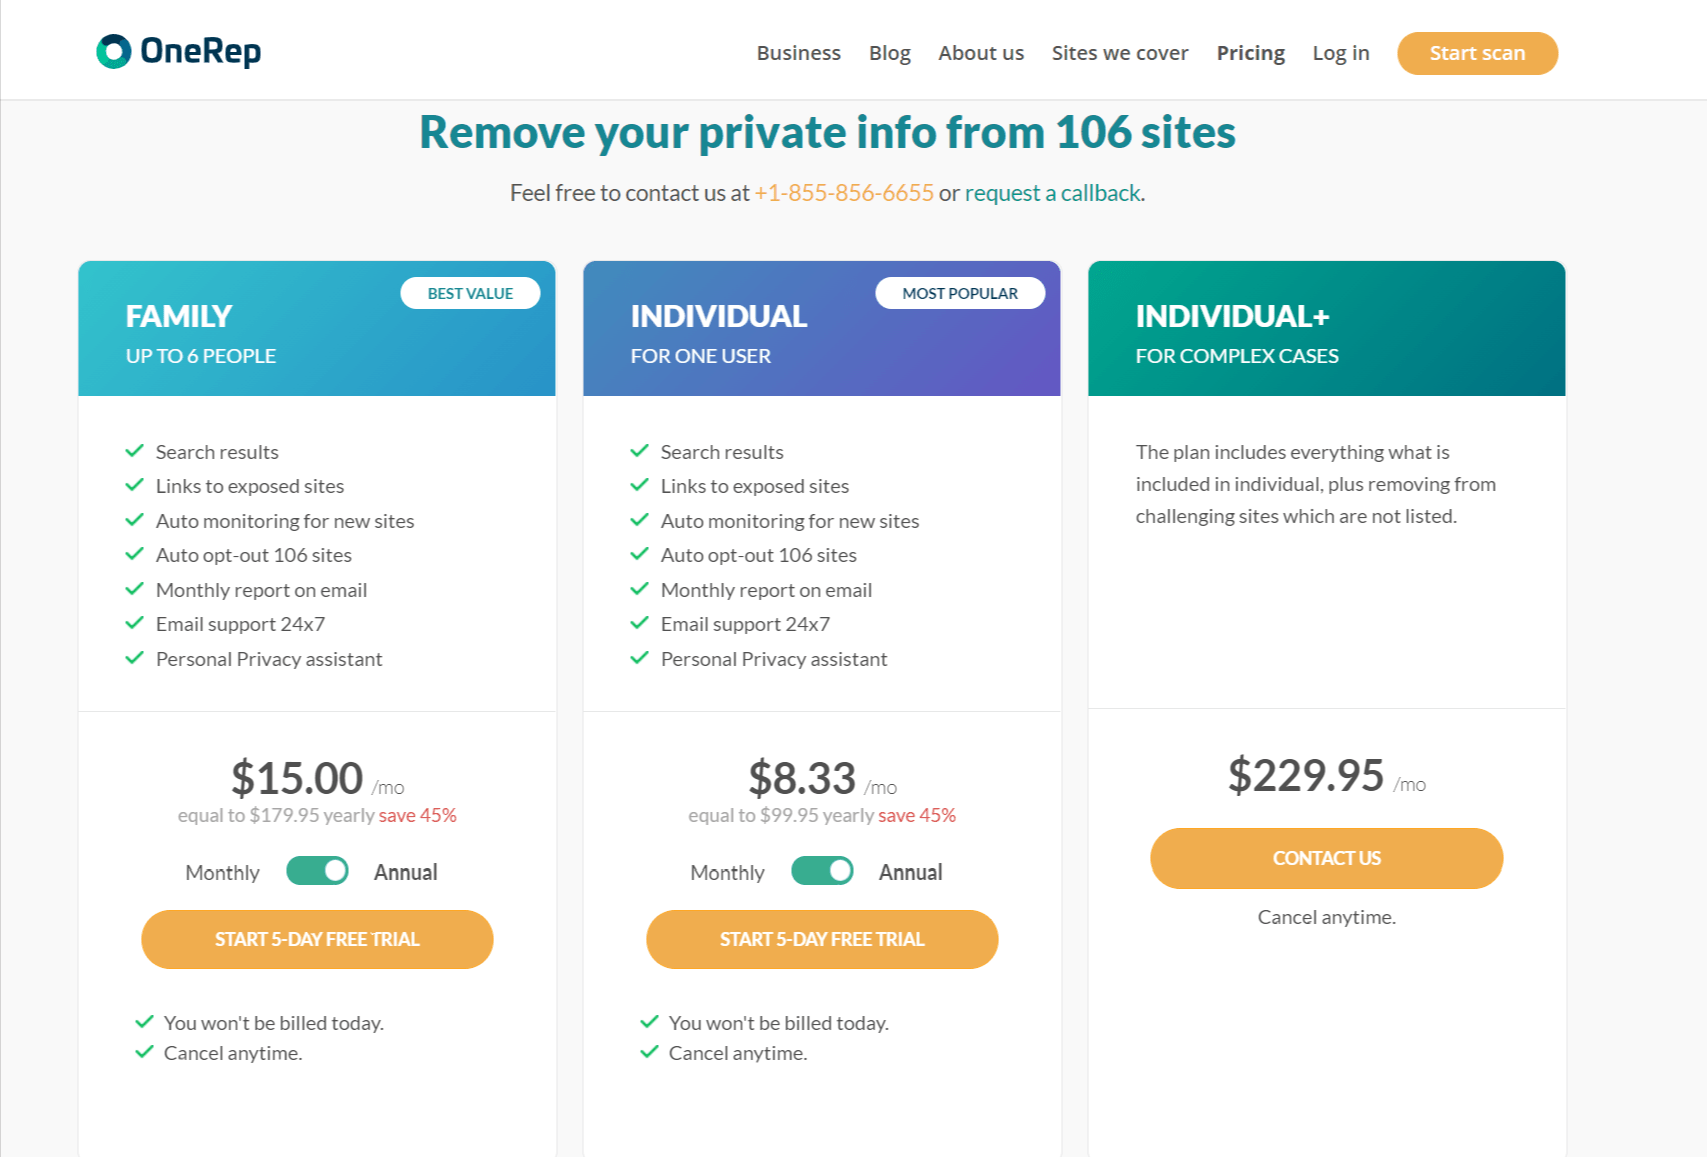 Pricing - oneRep Review